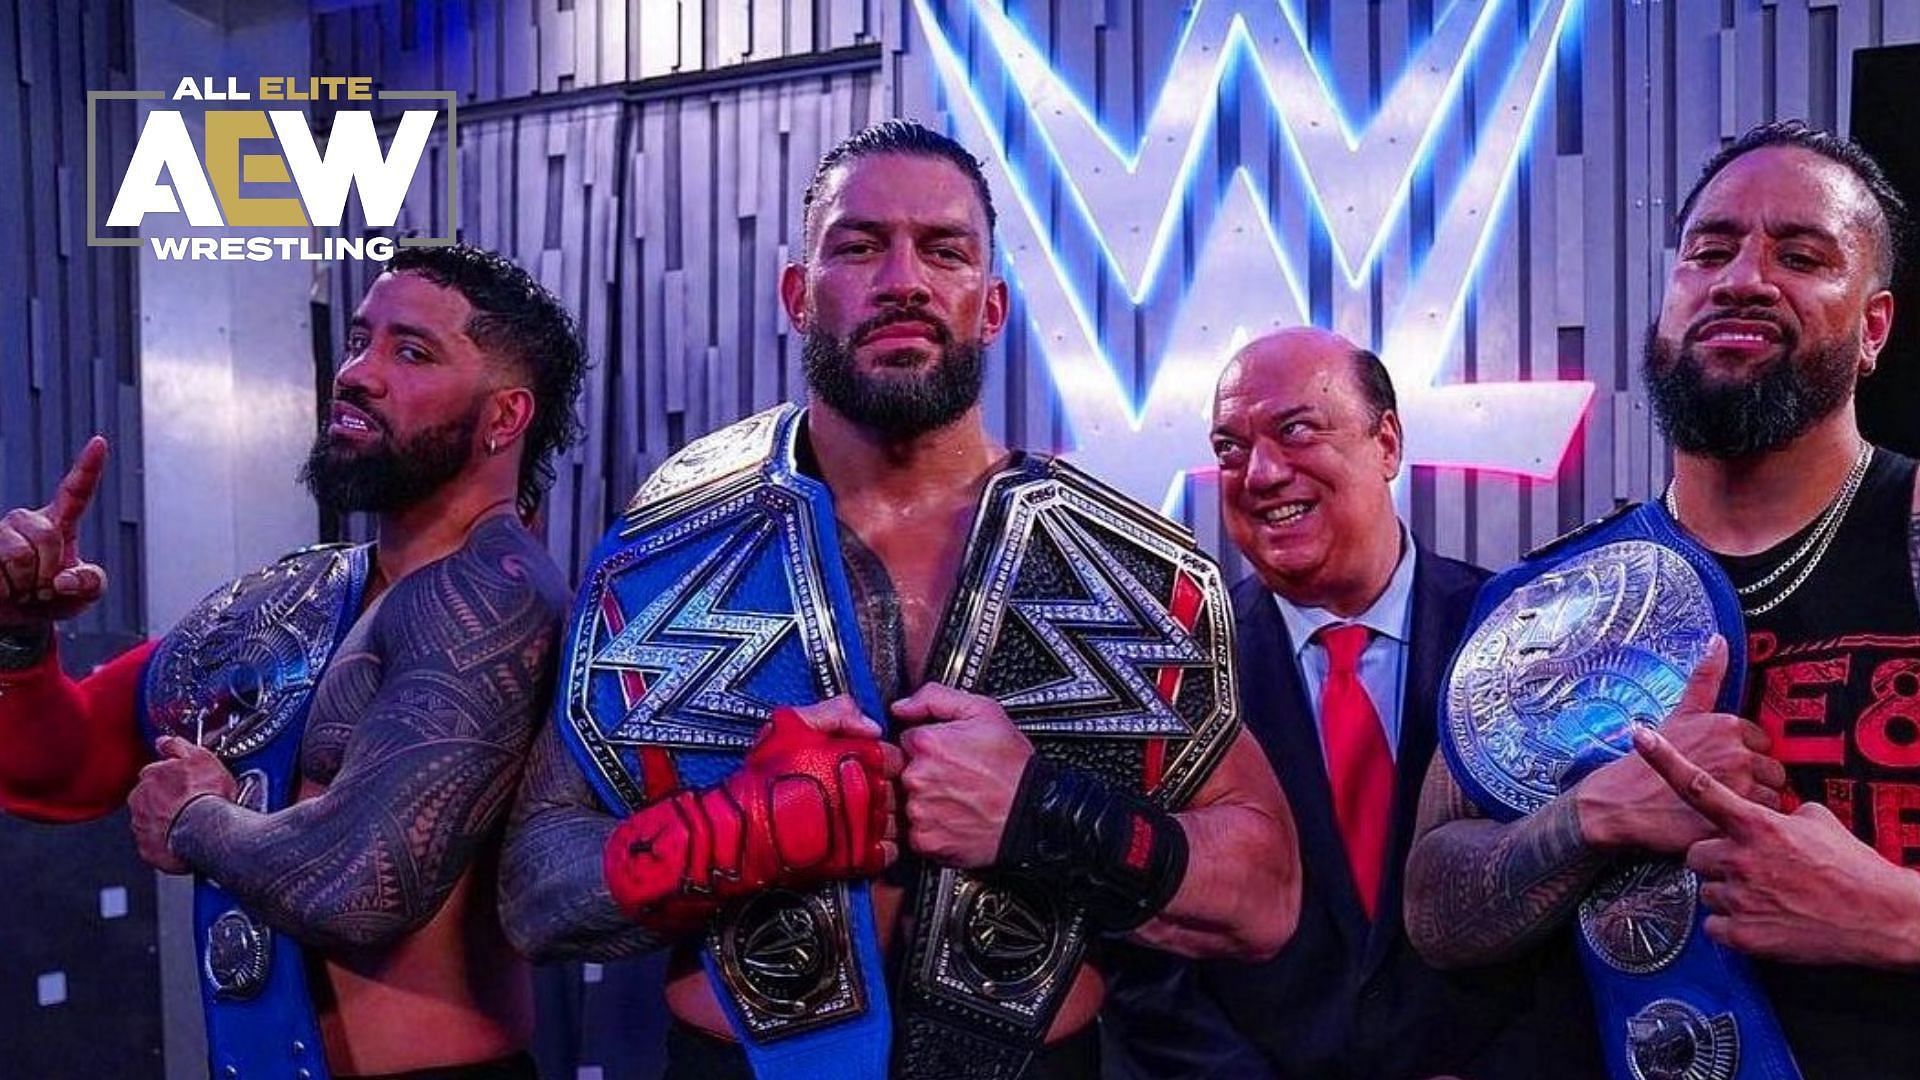 The Bloodline are currently dominating WWE